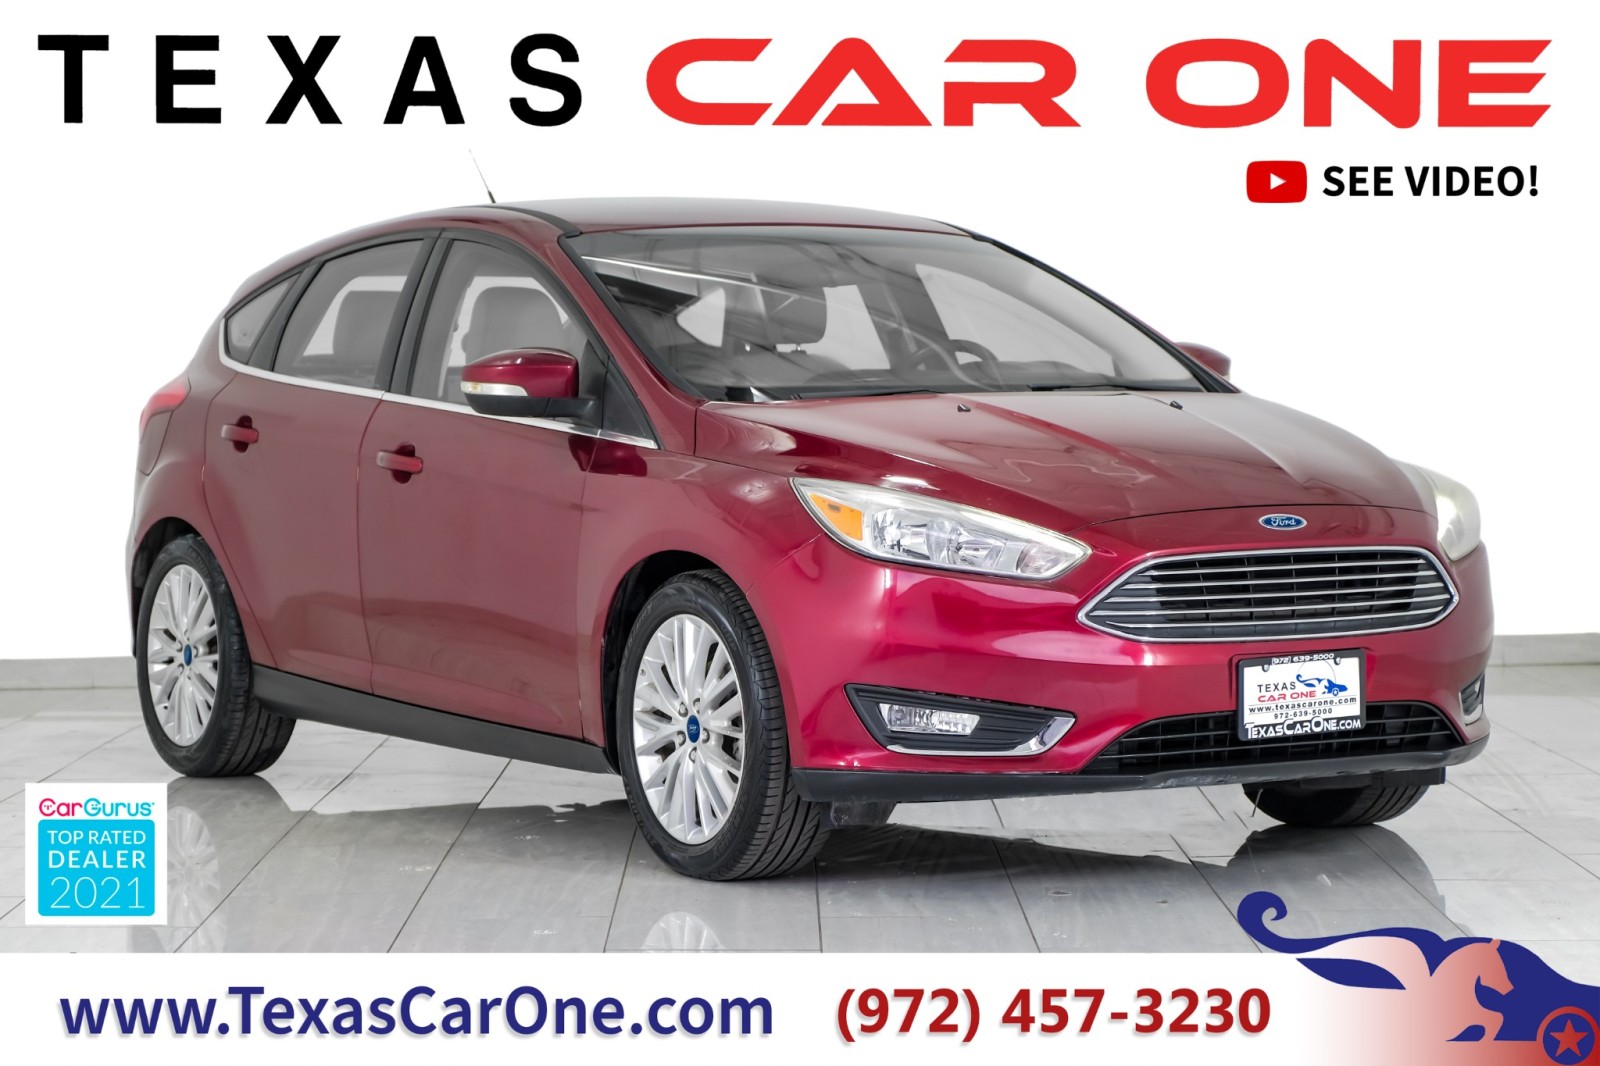 2016 Ford Focus TITANIUM HATCH AUTOMATIC LEATHER HEATED SEATS REAR 1